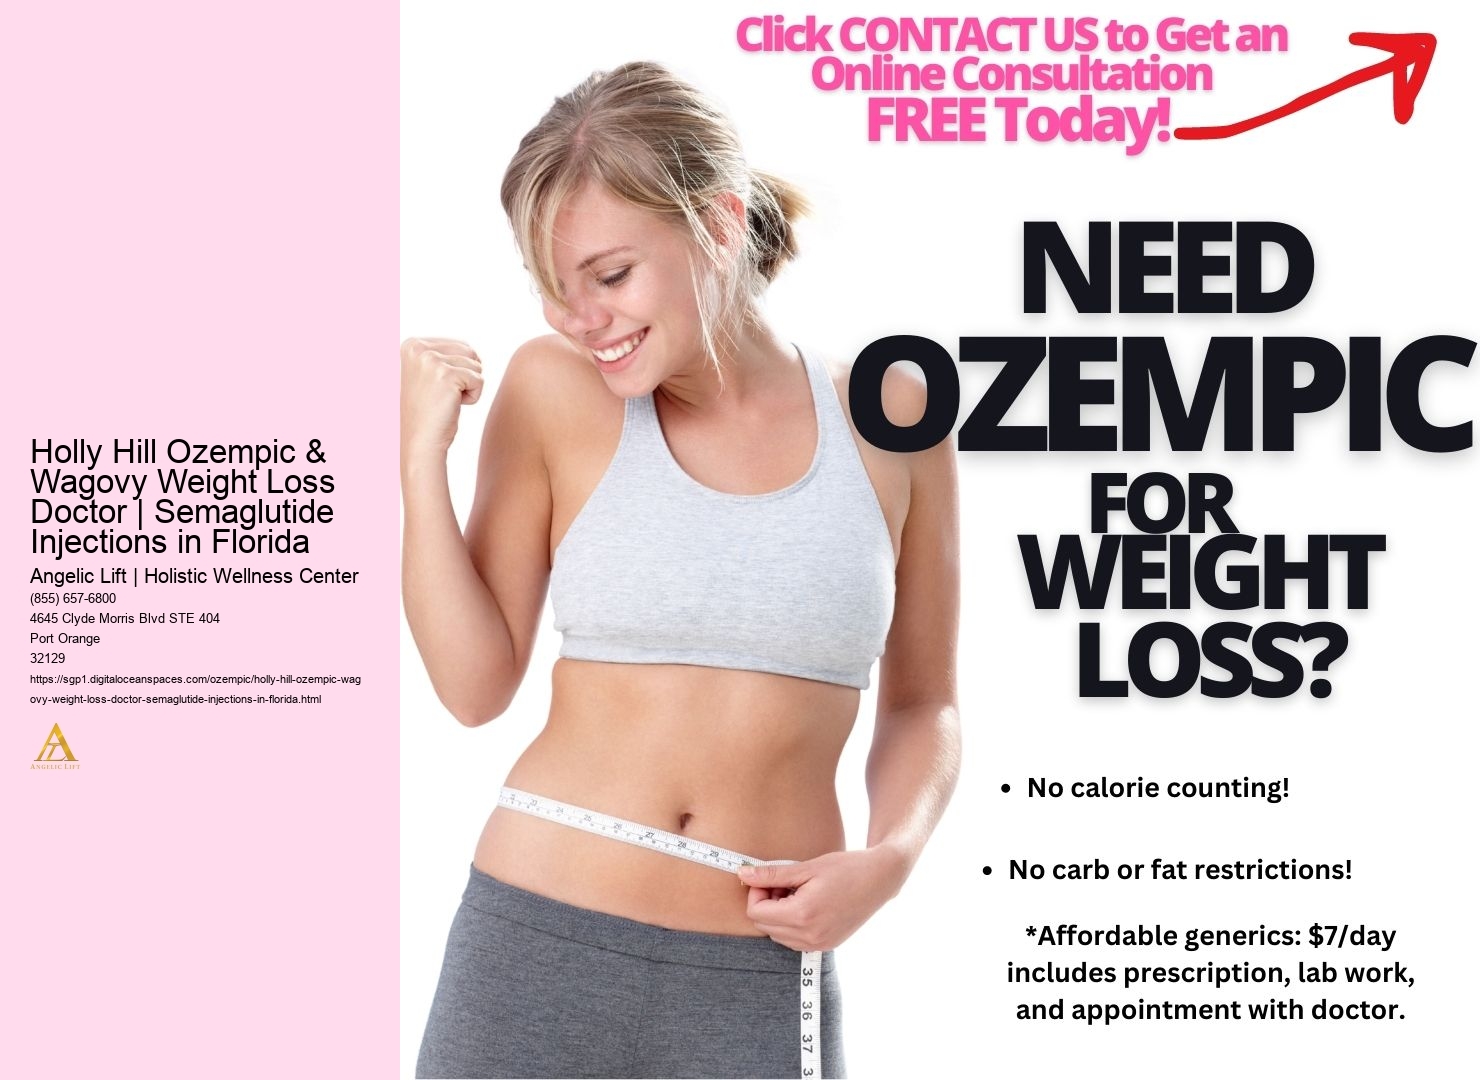 Holly Hill Ozempic & Wagovy Weight Loss Doctor | Semaglutide Injections in Florida